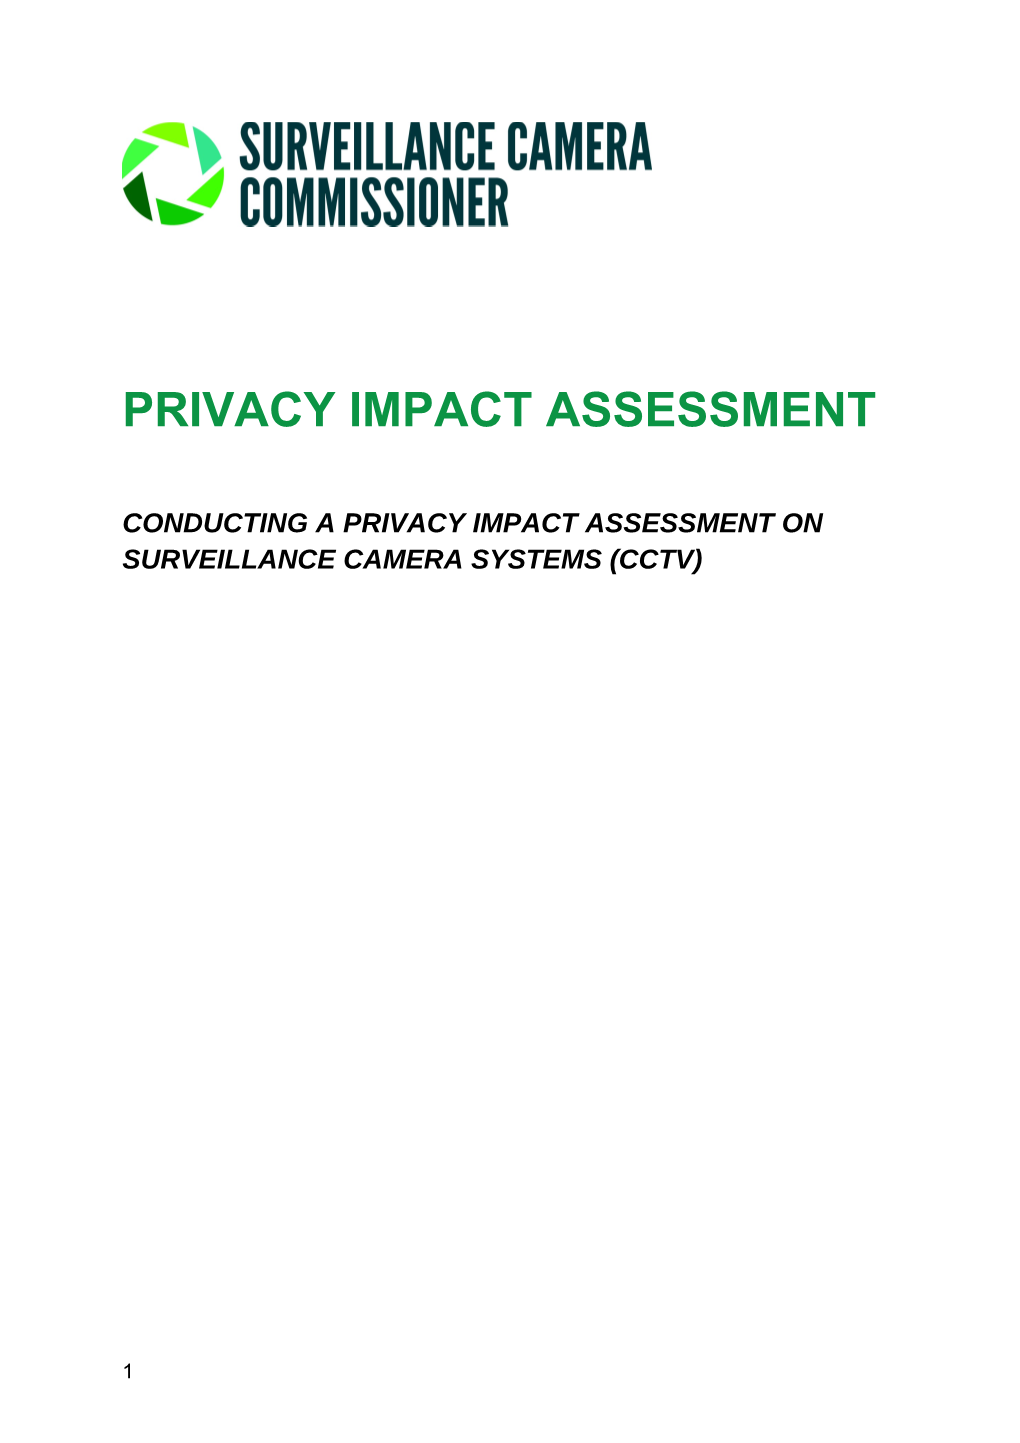 Conducting a Privacy Impact Assessment on Surveillance Camera Systems (CCTV)